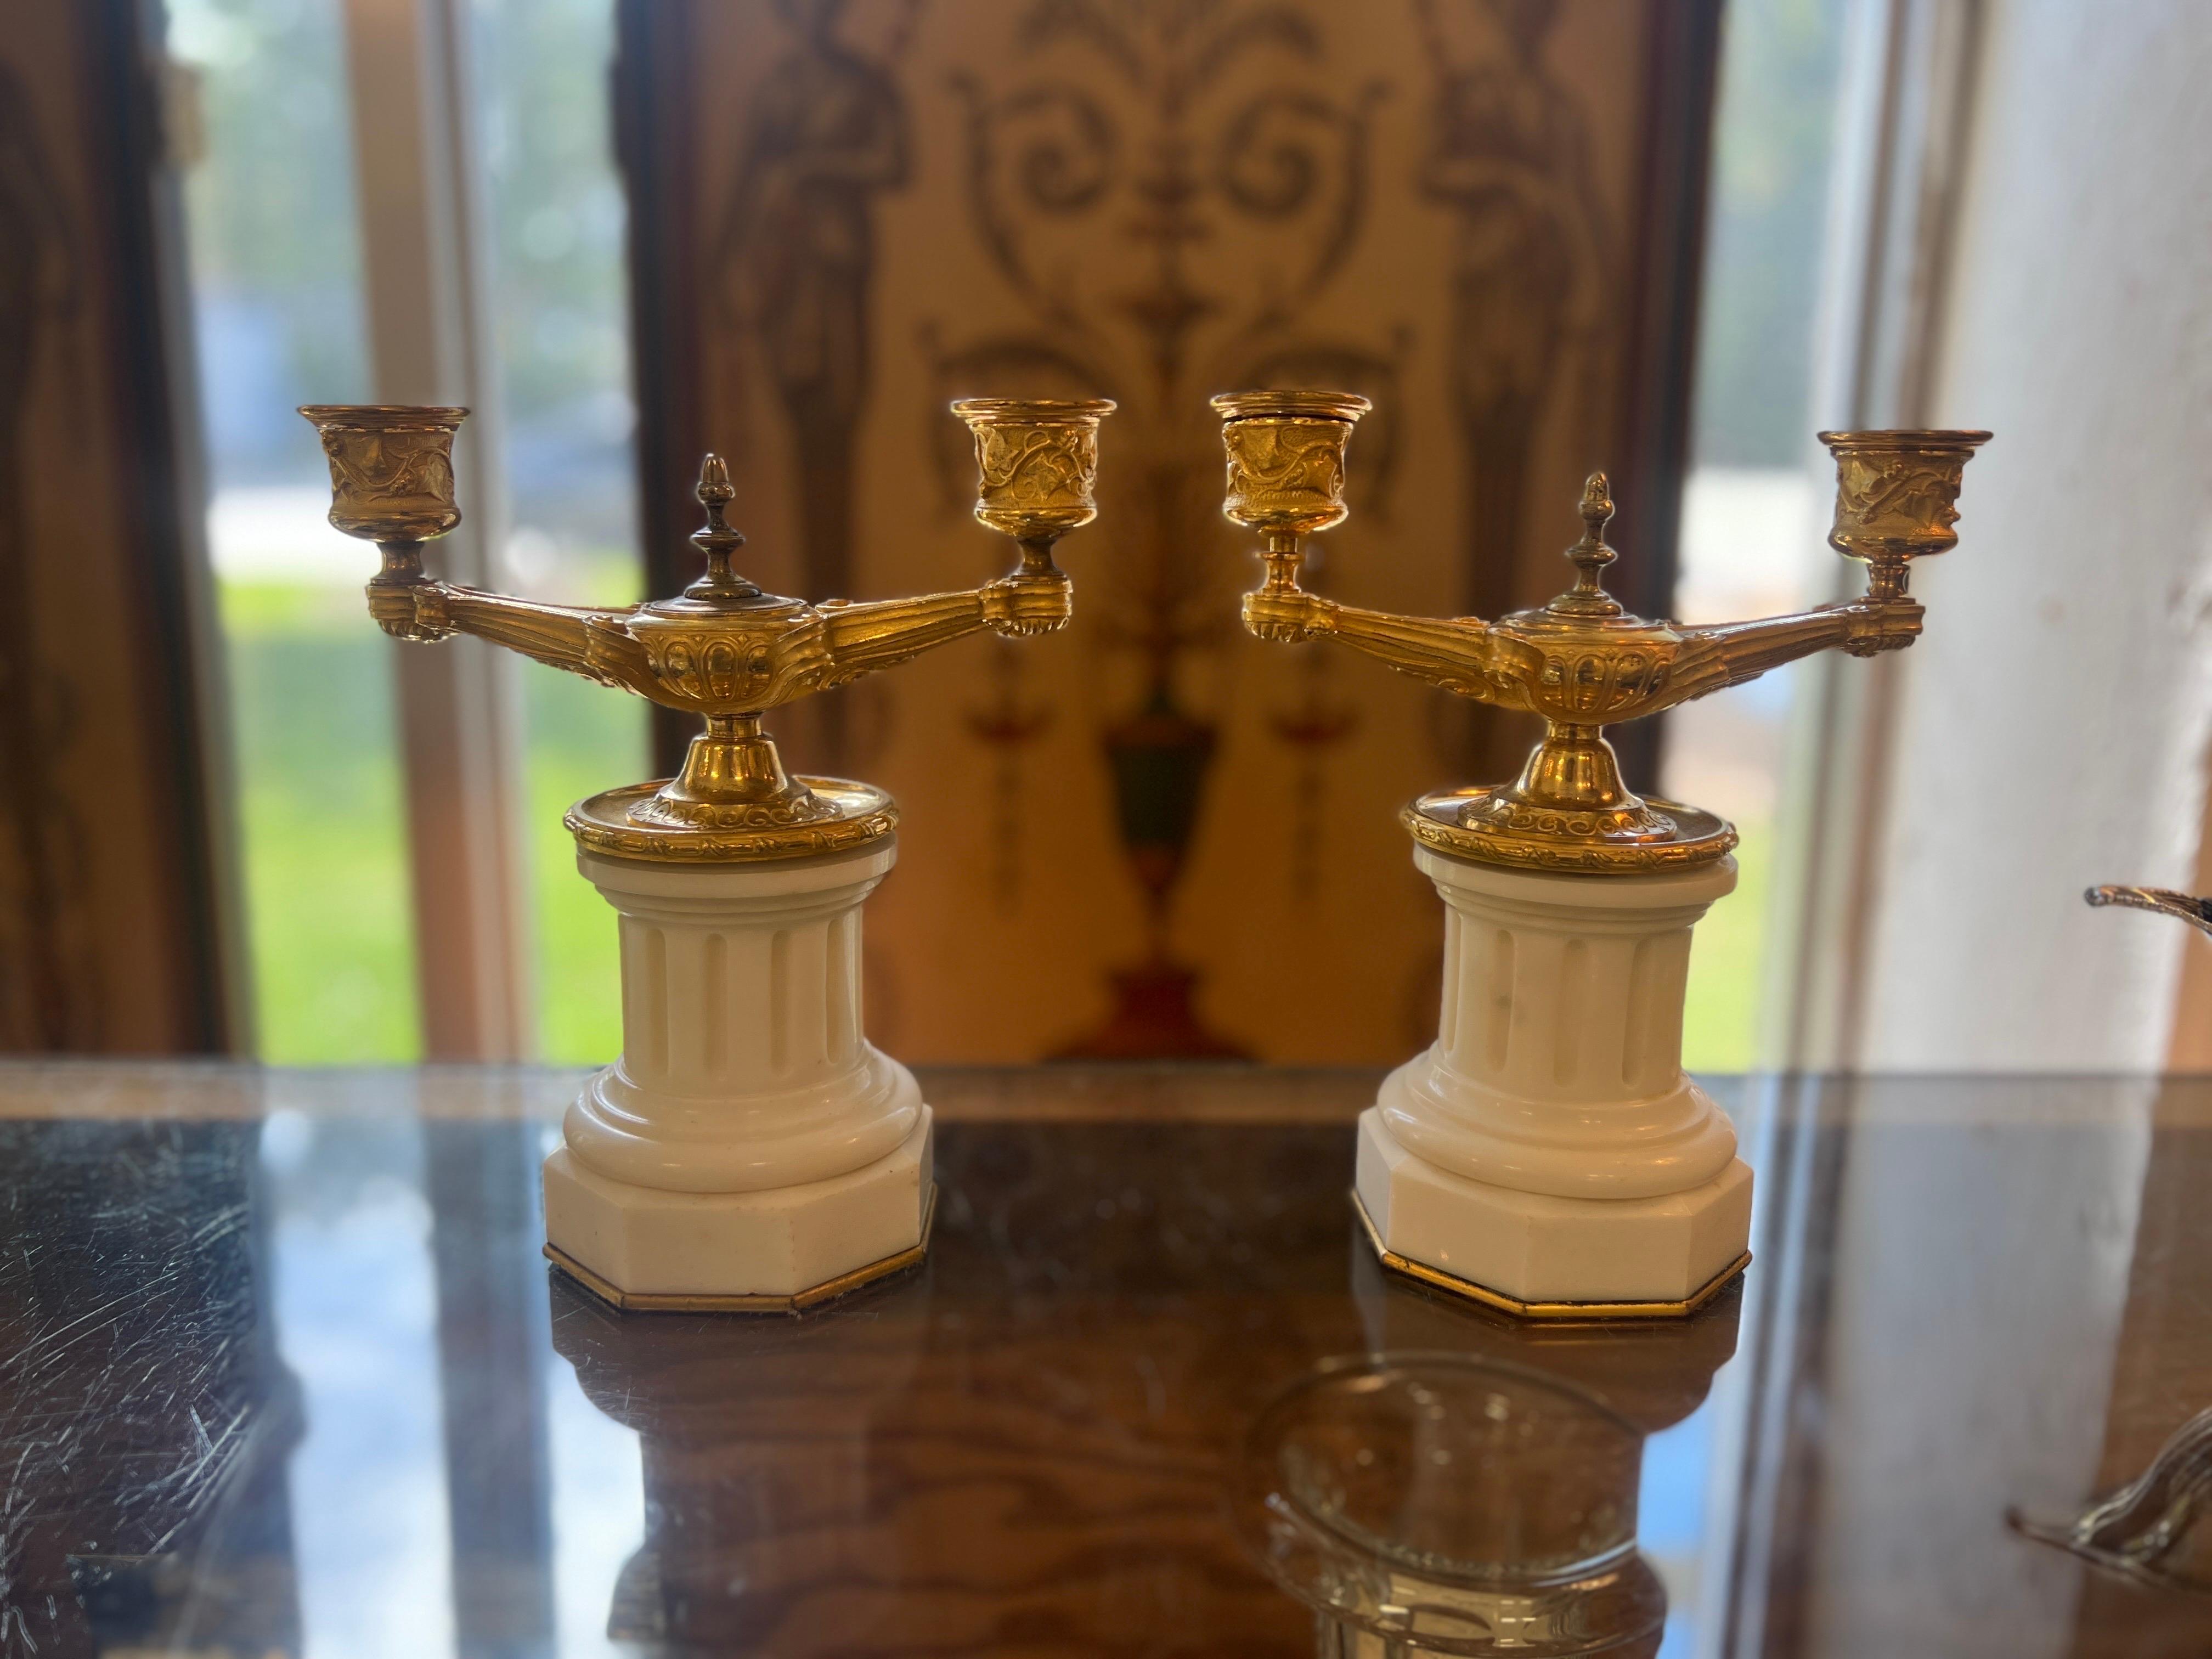 Italian or French, early 19th century.

A fantastic pair of 19th century Grand Tour gilt bronze candelabras in the neoclassical taste. The beautiful cast grape vines to the candle arms, scrolled arms extending off a genie lamp style body. Each